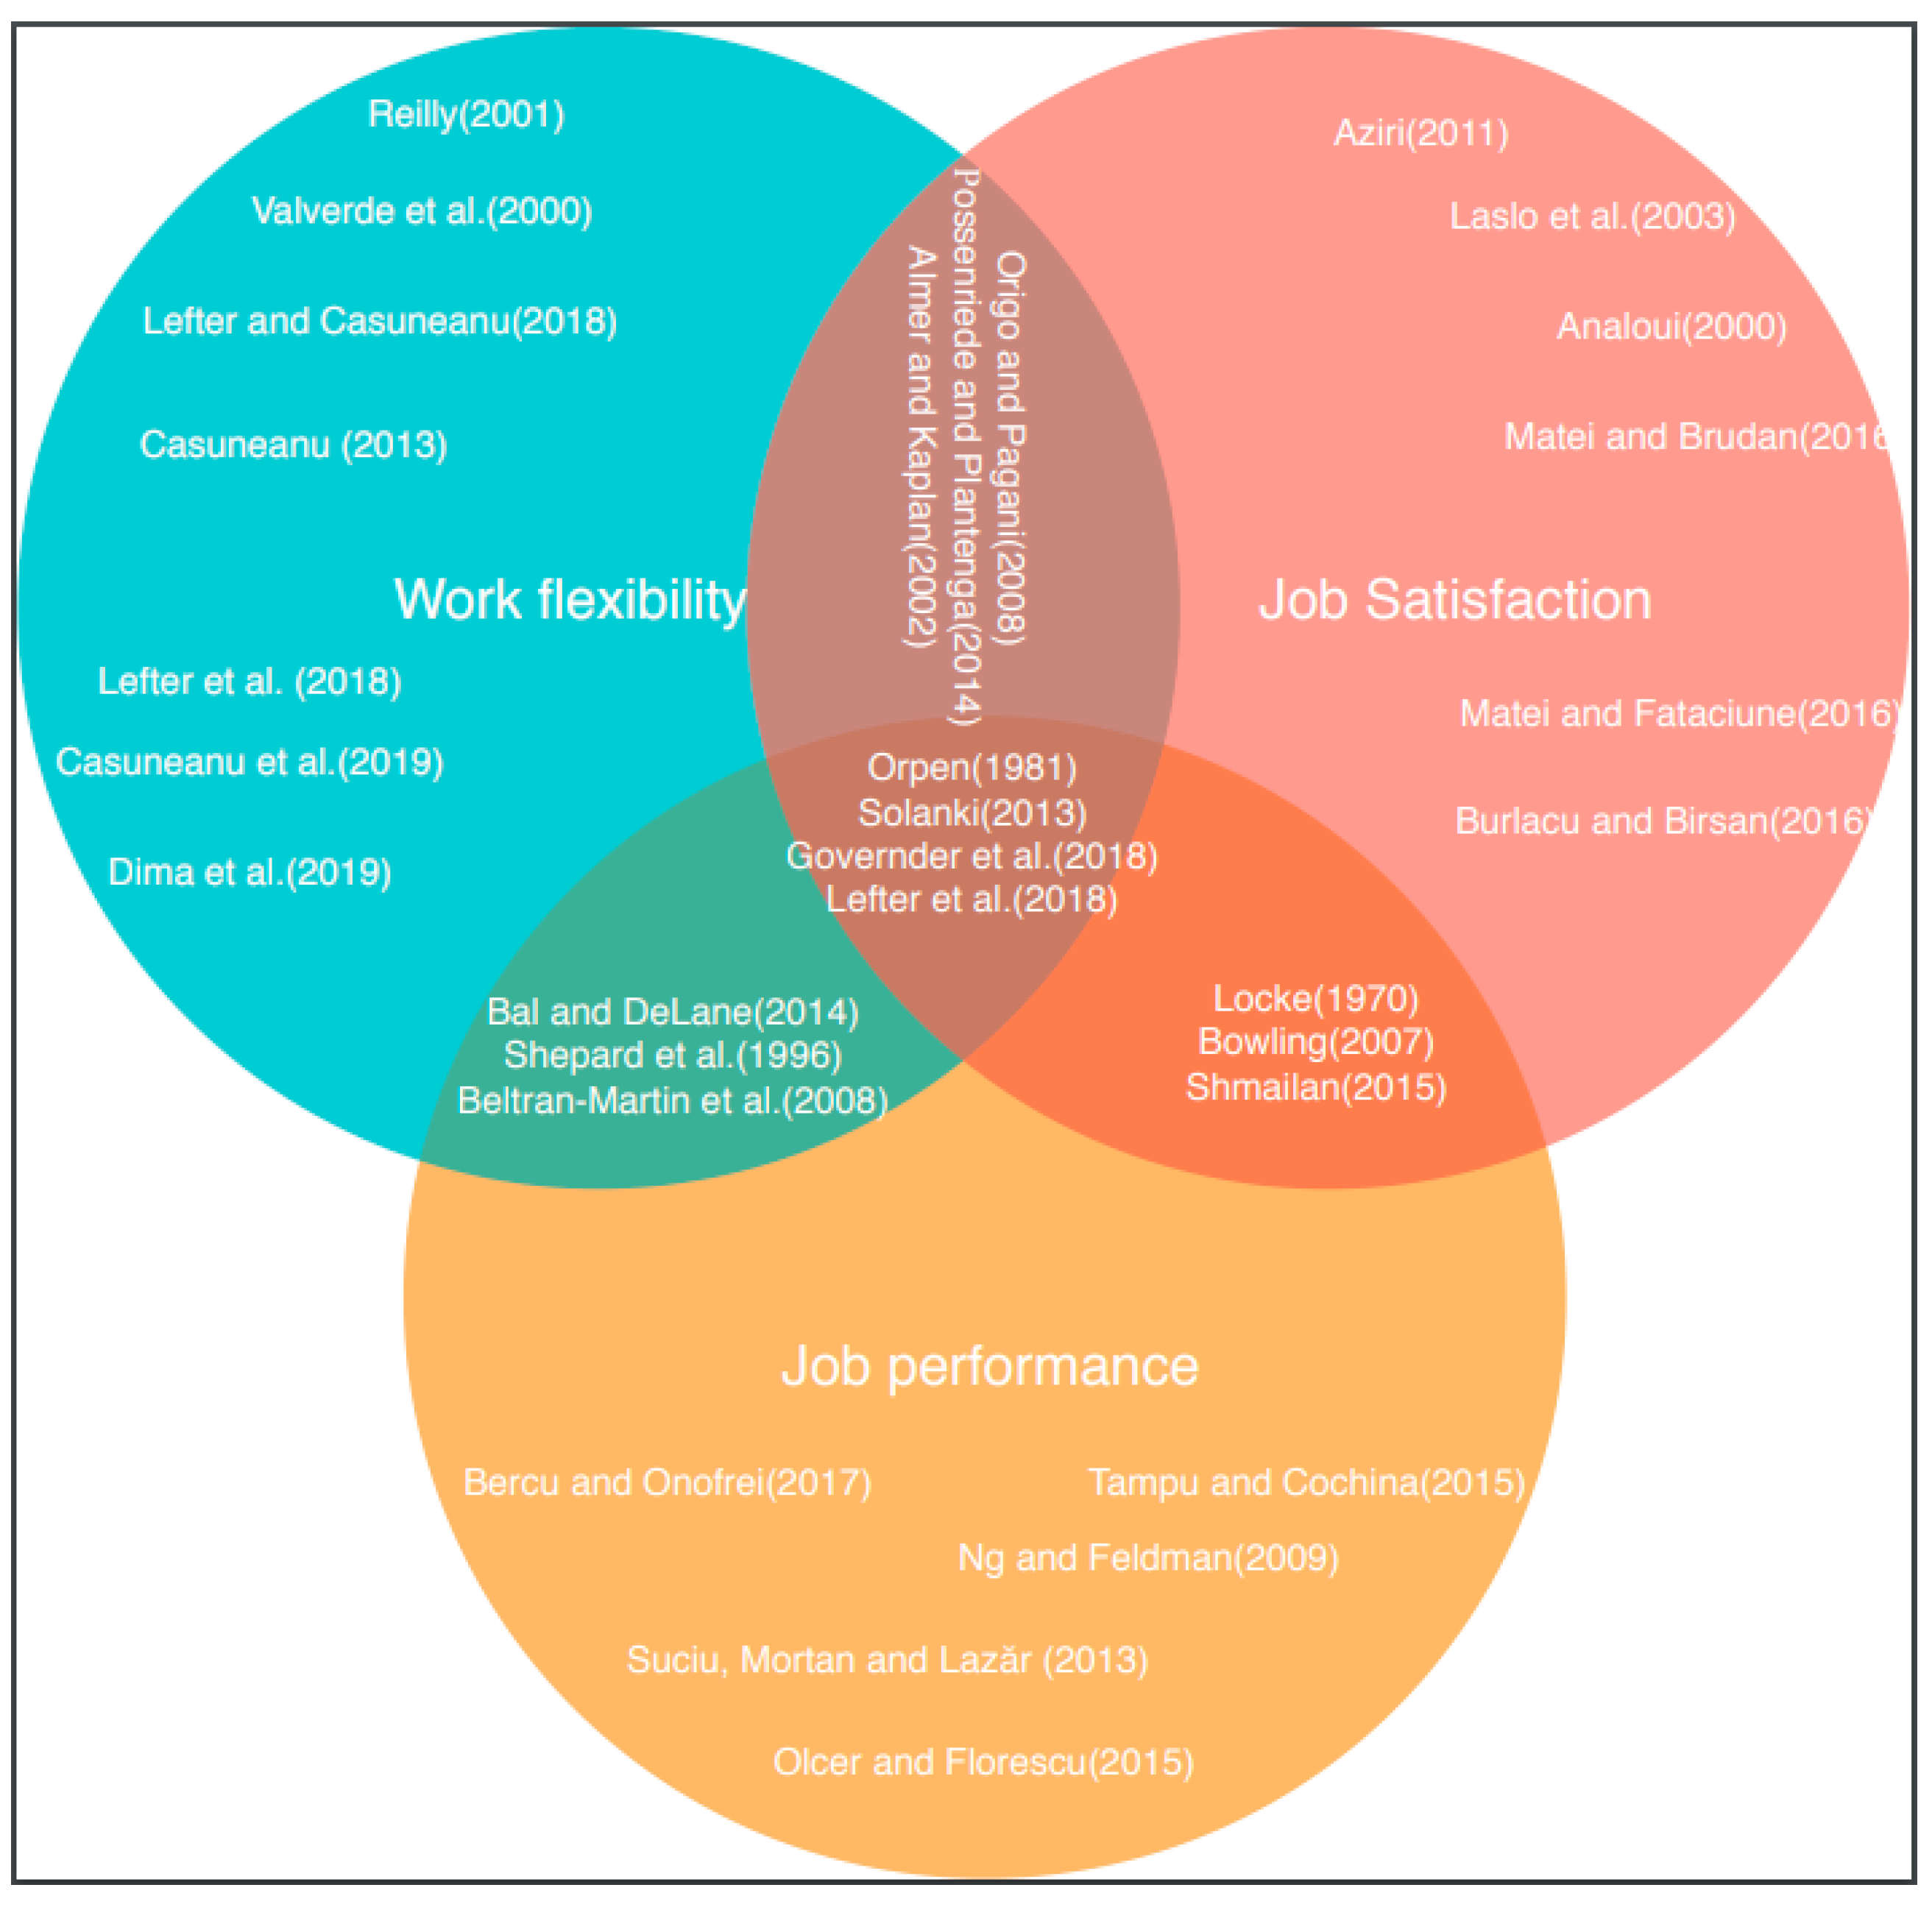 Level of importance of employment characteristics